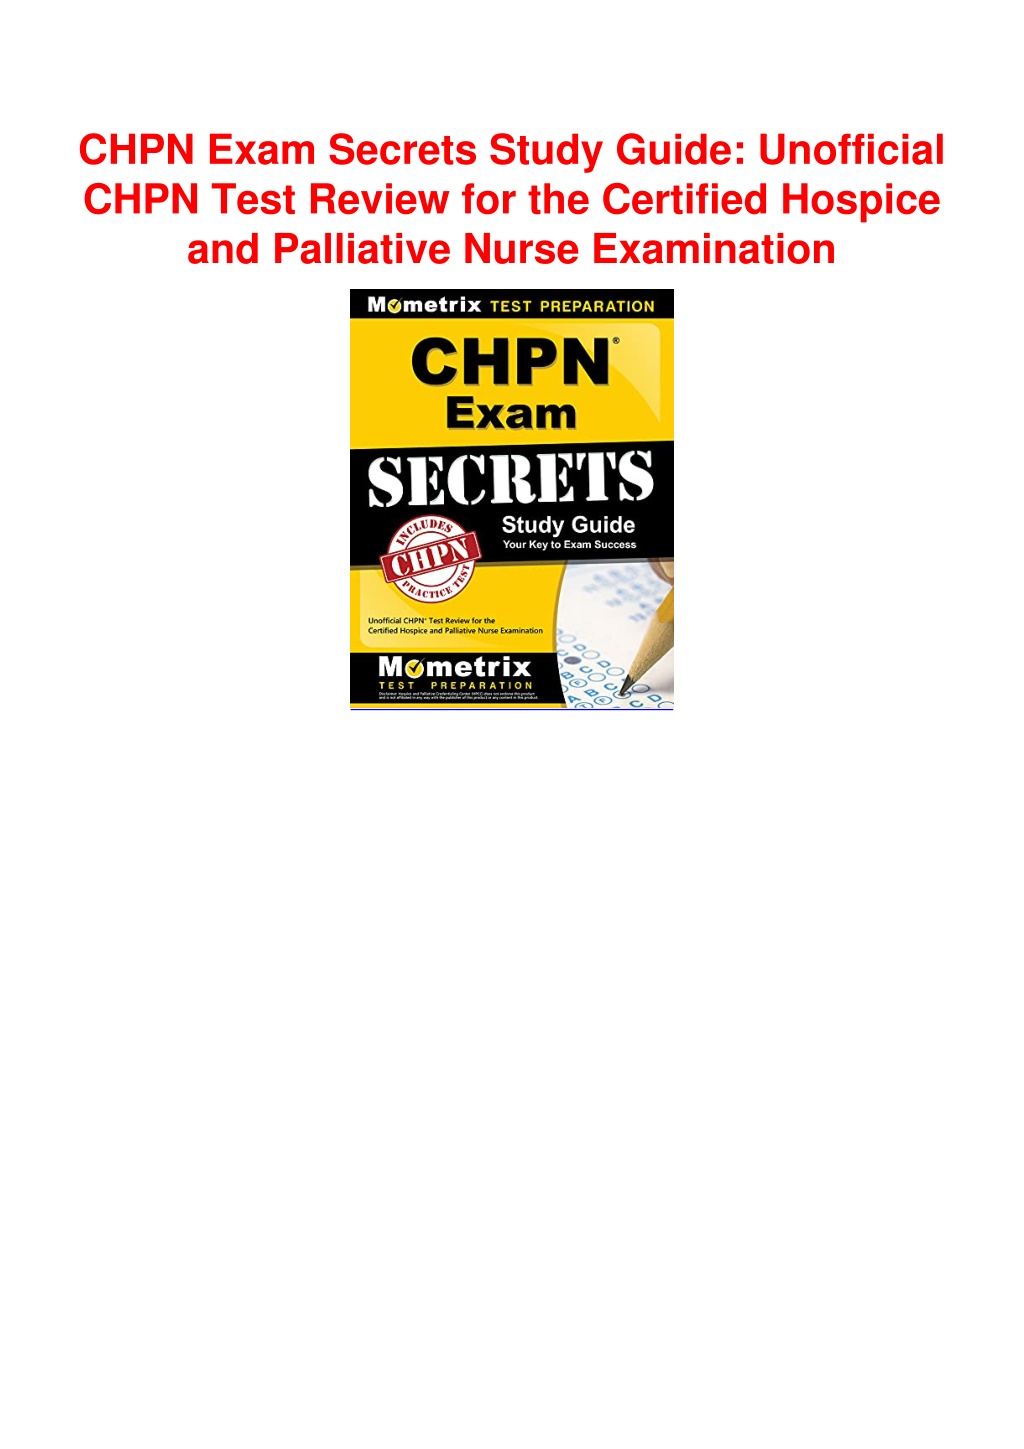 PPT (PDF/DOWNLOAD) CHPN Exam Secrets Study Guide Unofficial CHPN